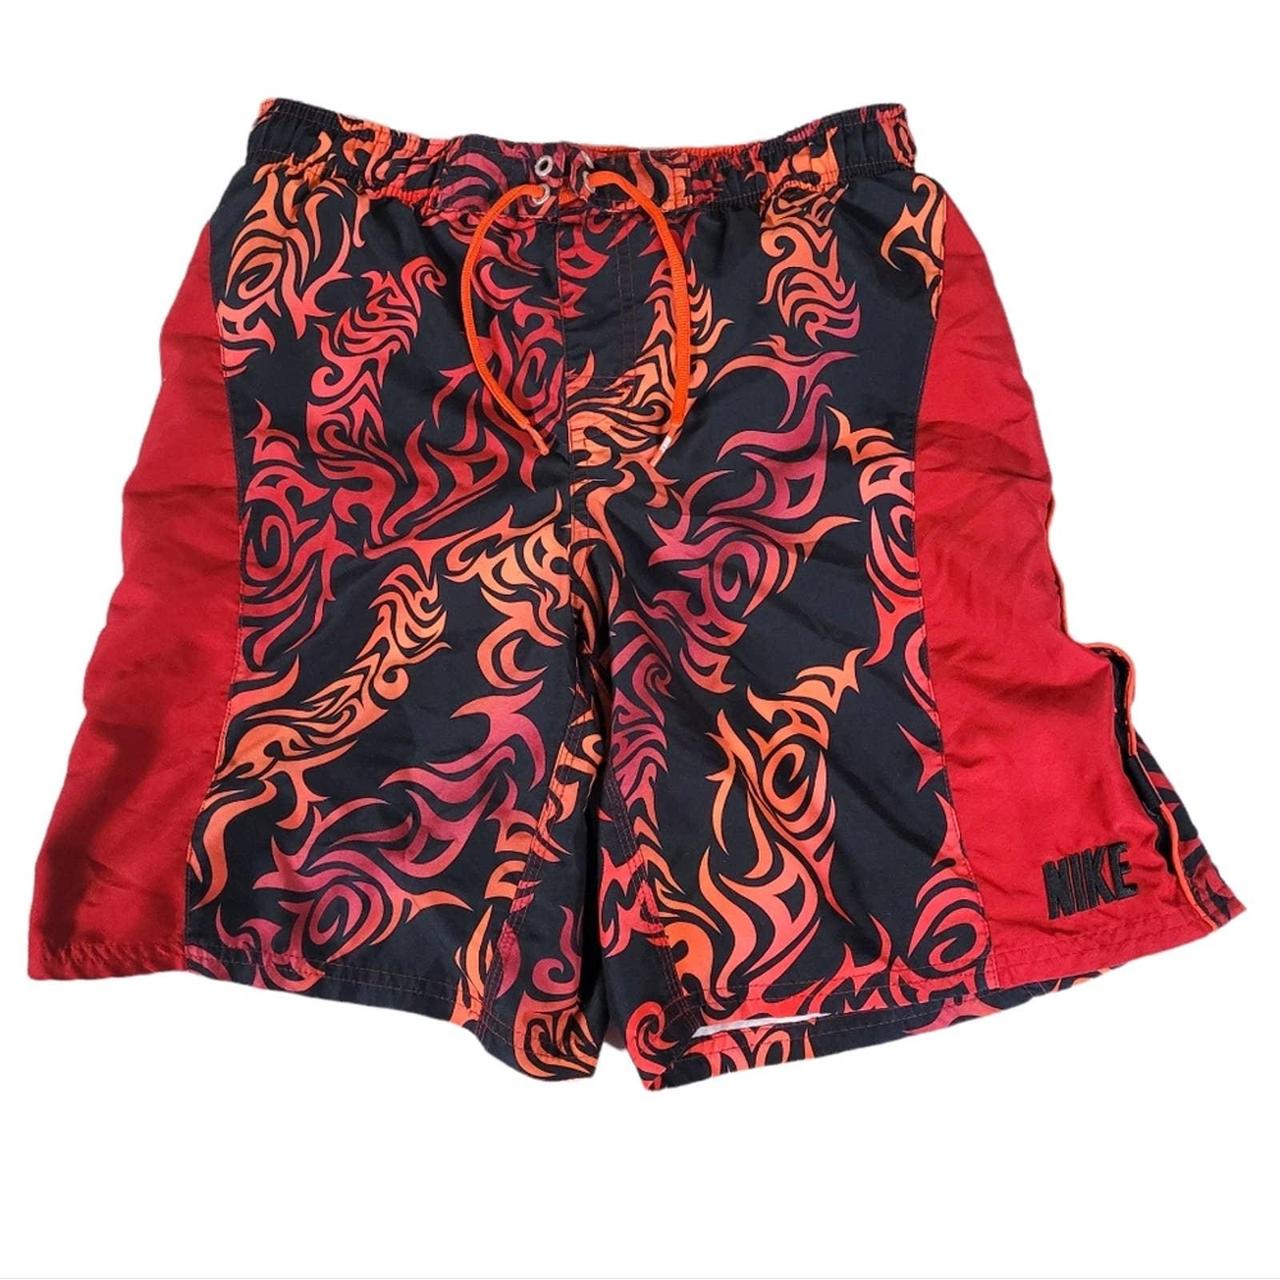 Nike Men's Red and Black Swim-briefs-shorts